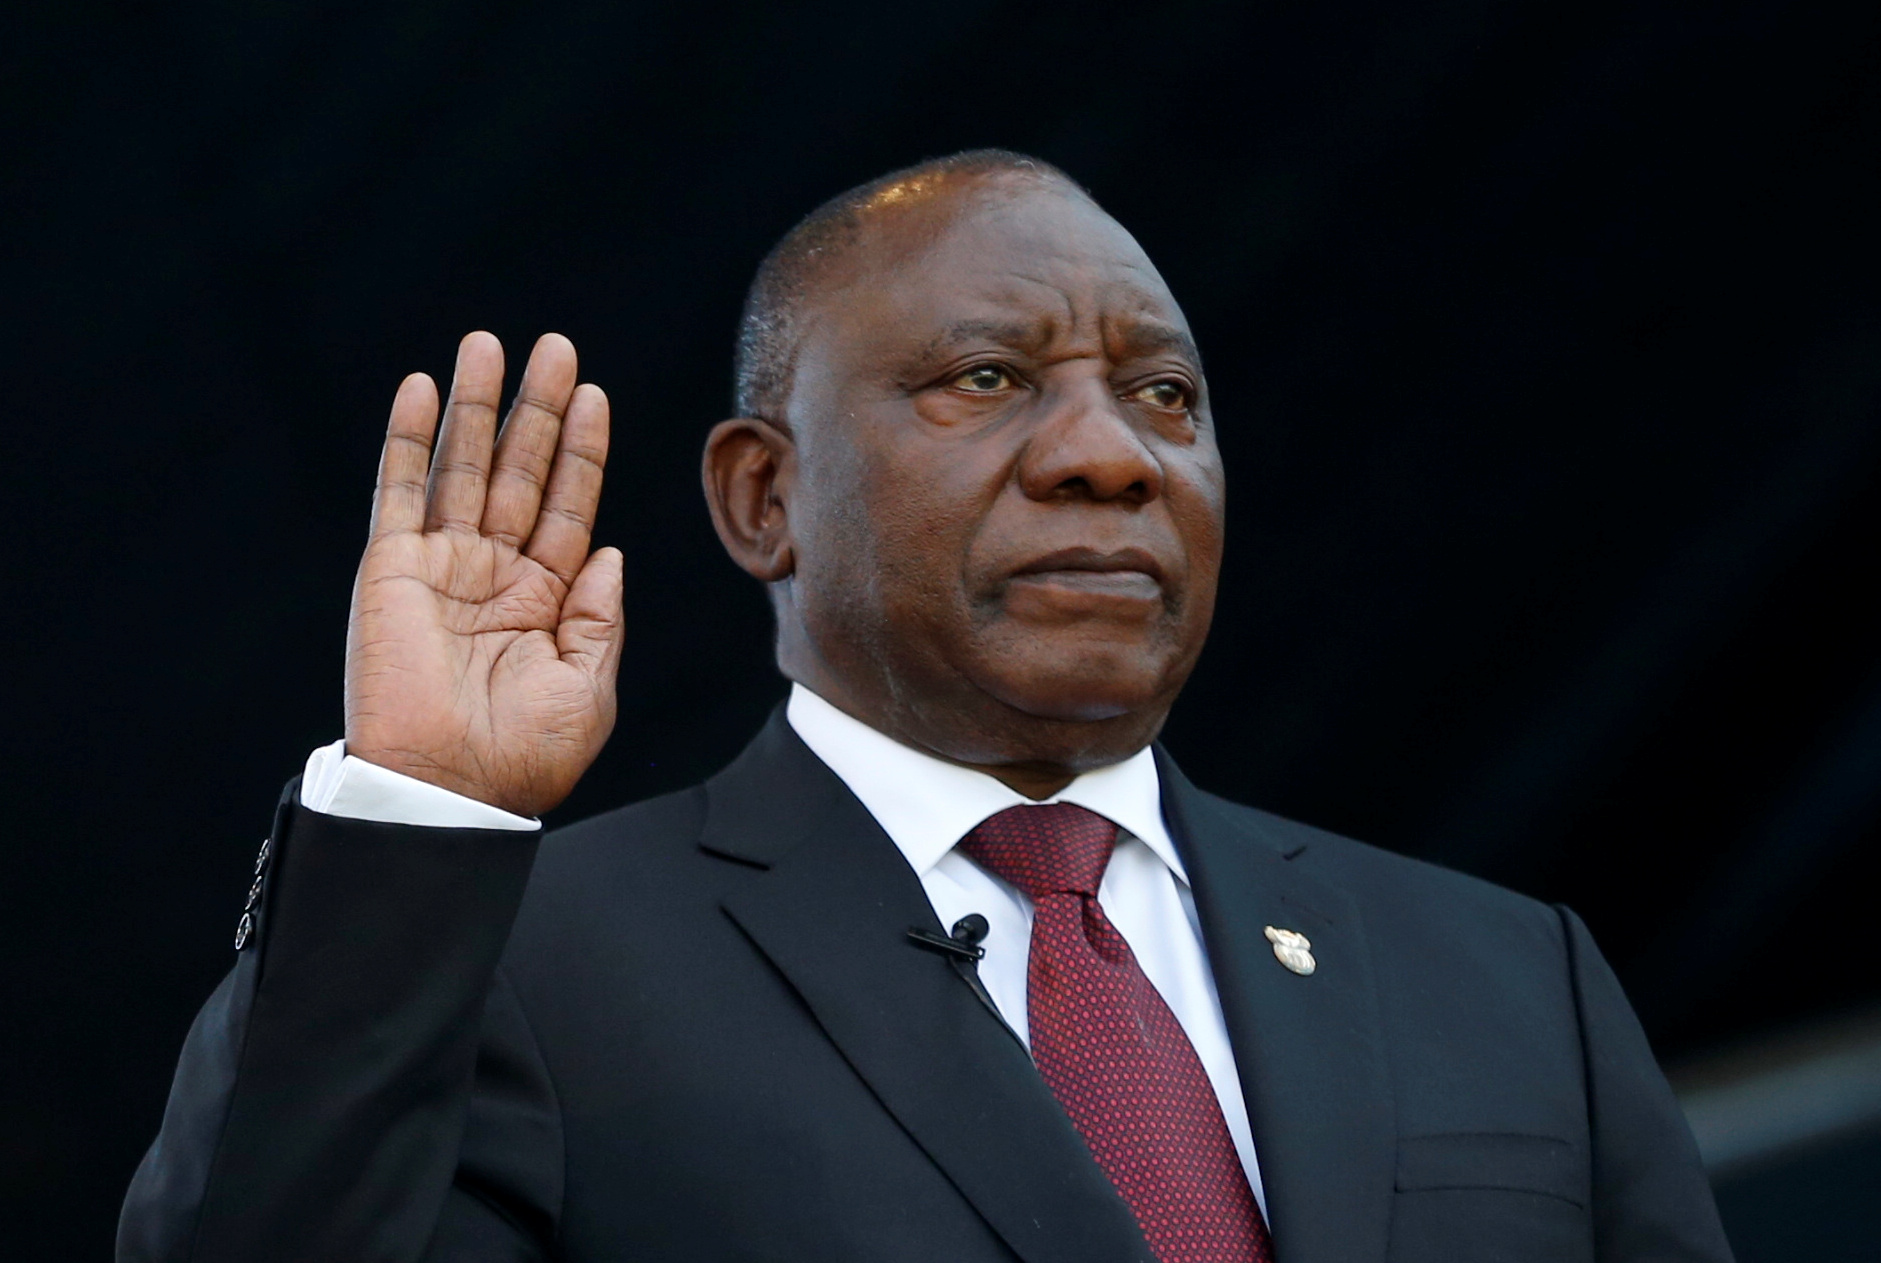 Cyril Ramaphosa takes the oath of office at his inauguation as South African president